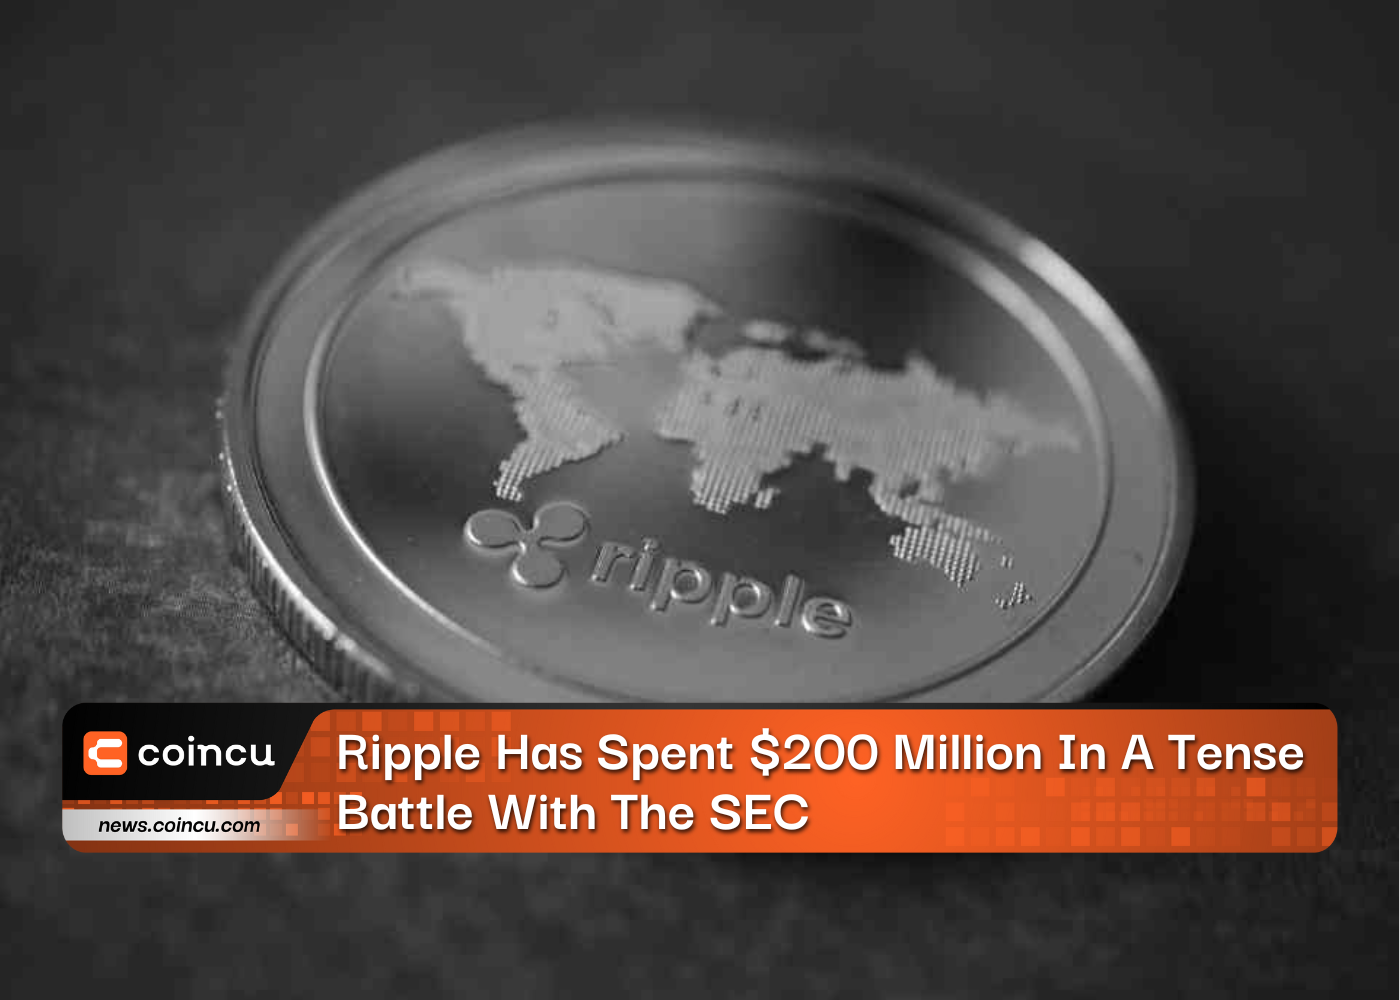 Ripple Has Spent $200 Million In A Tense Battle With The SEC